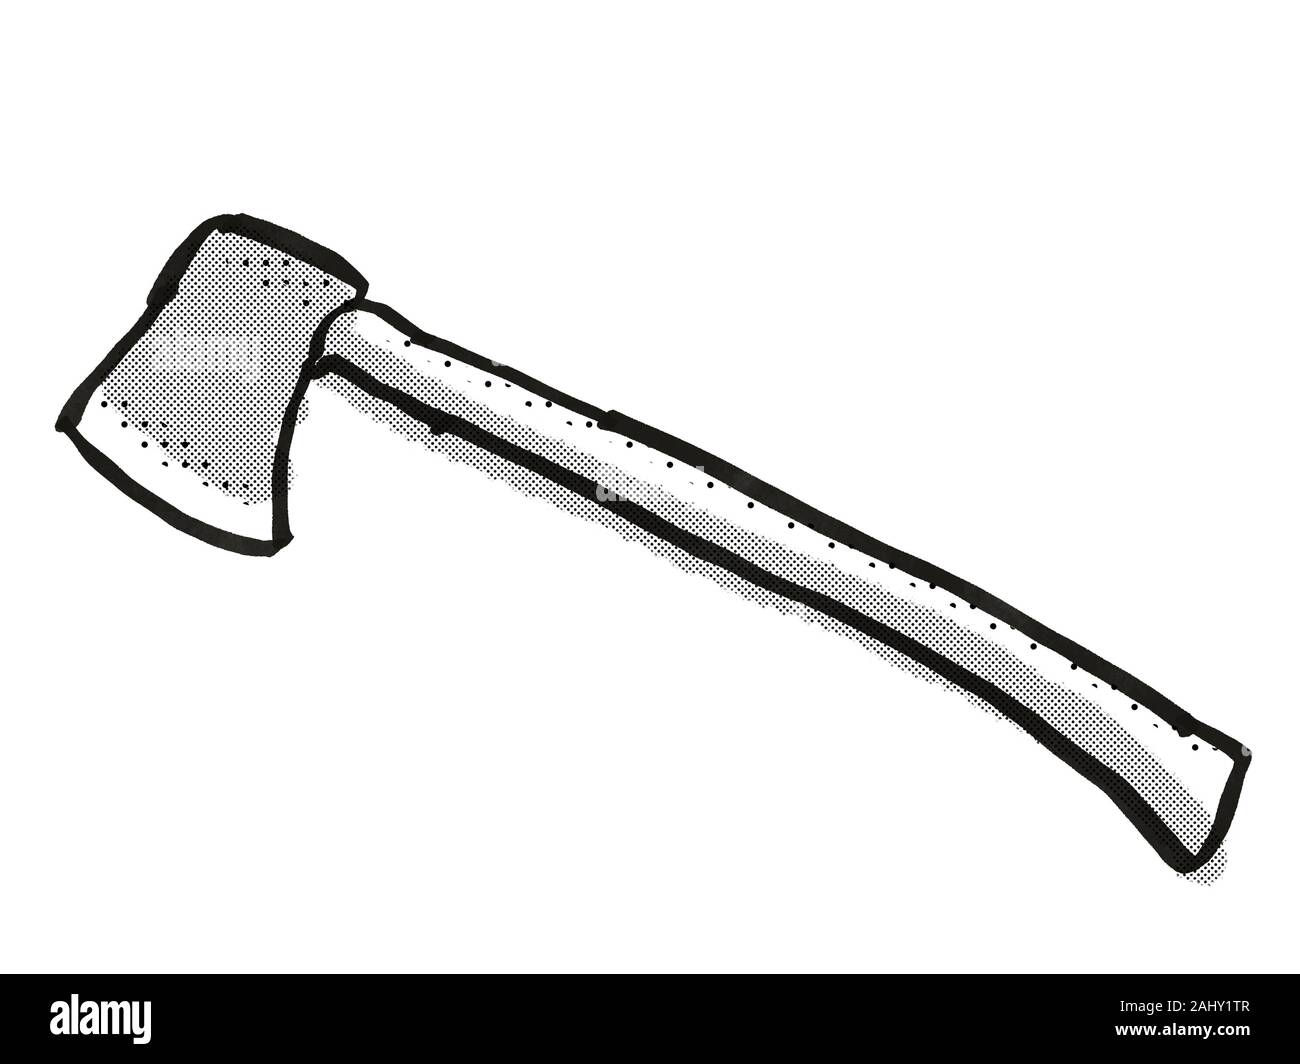 Retro cartoon style drawing of a splitting axe, a garden or gardening tool equipment on isolated white background done in black and white Stock Photo